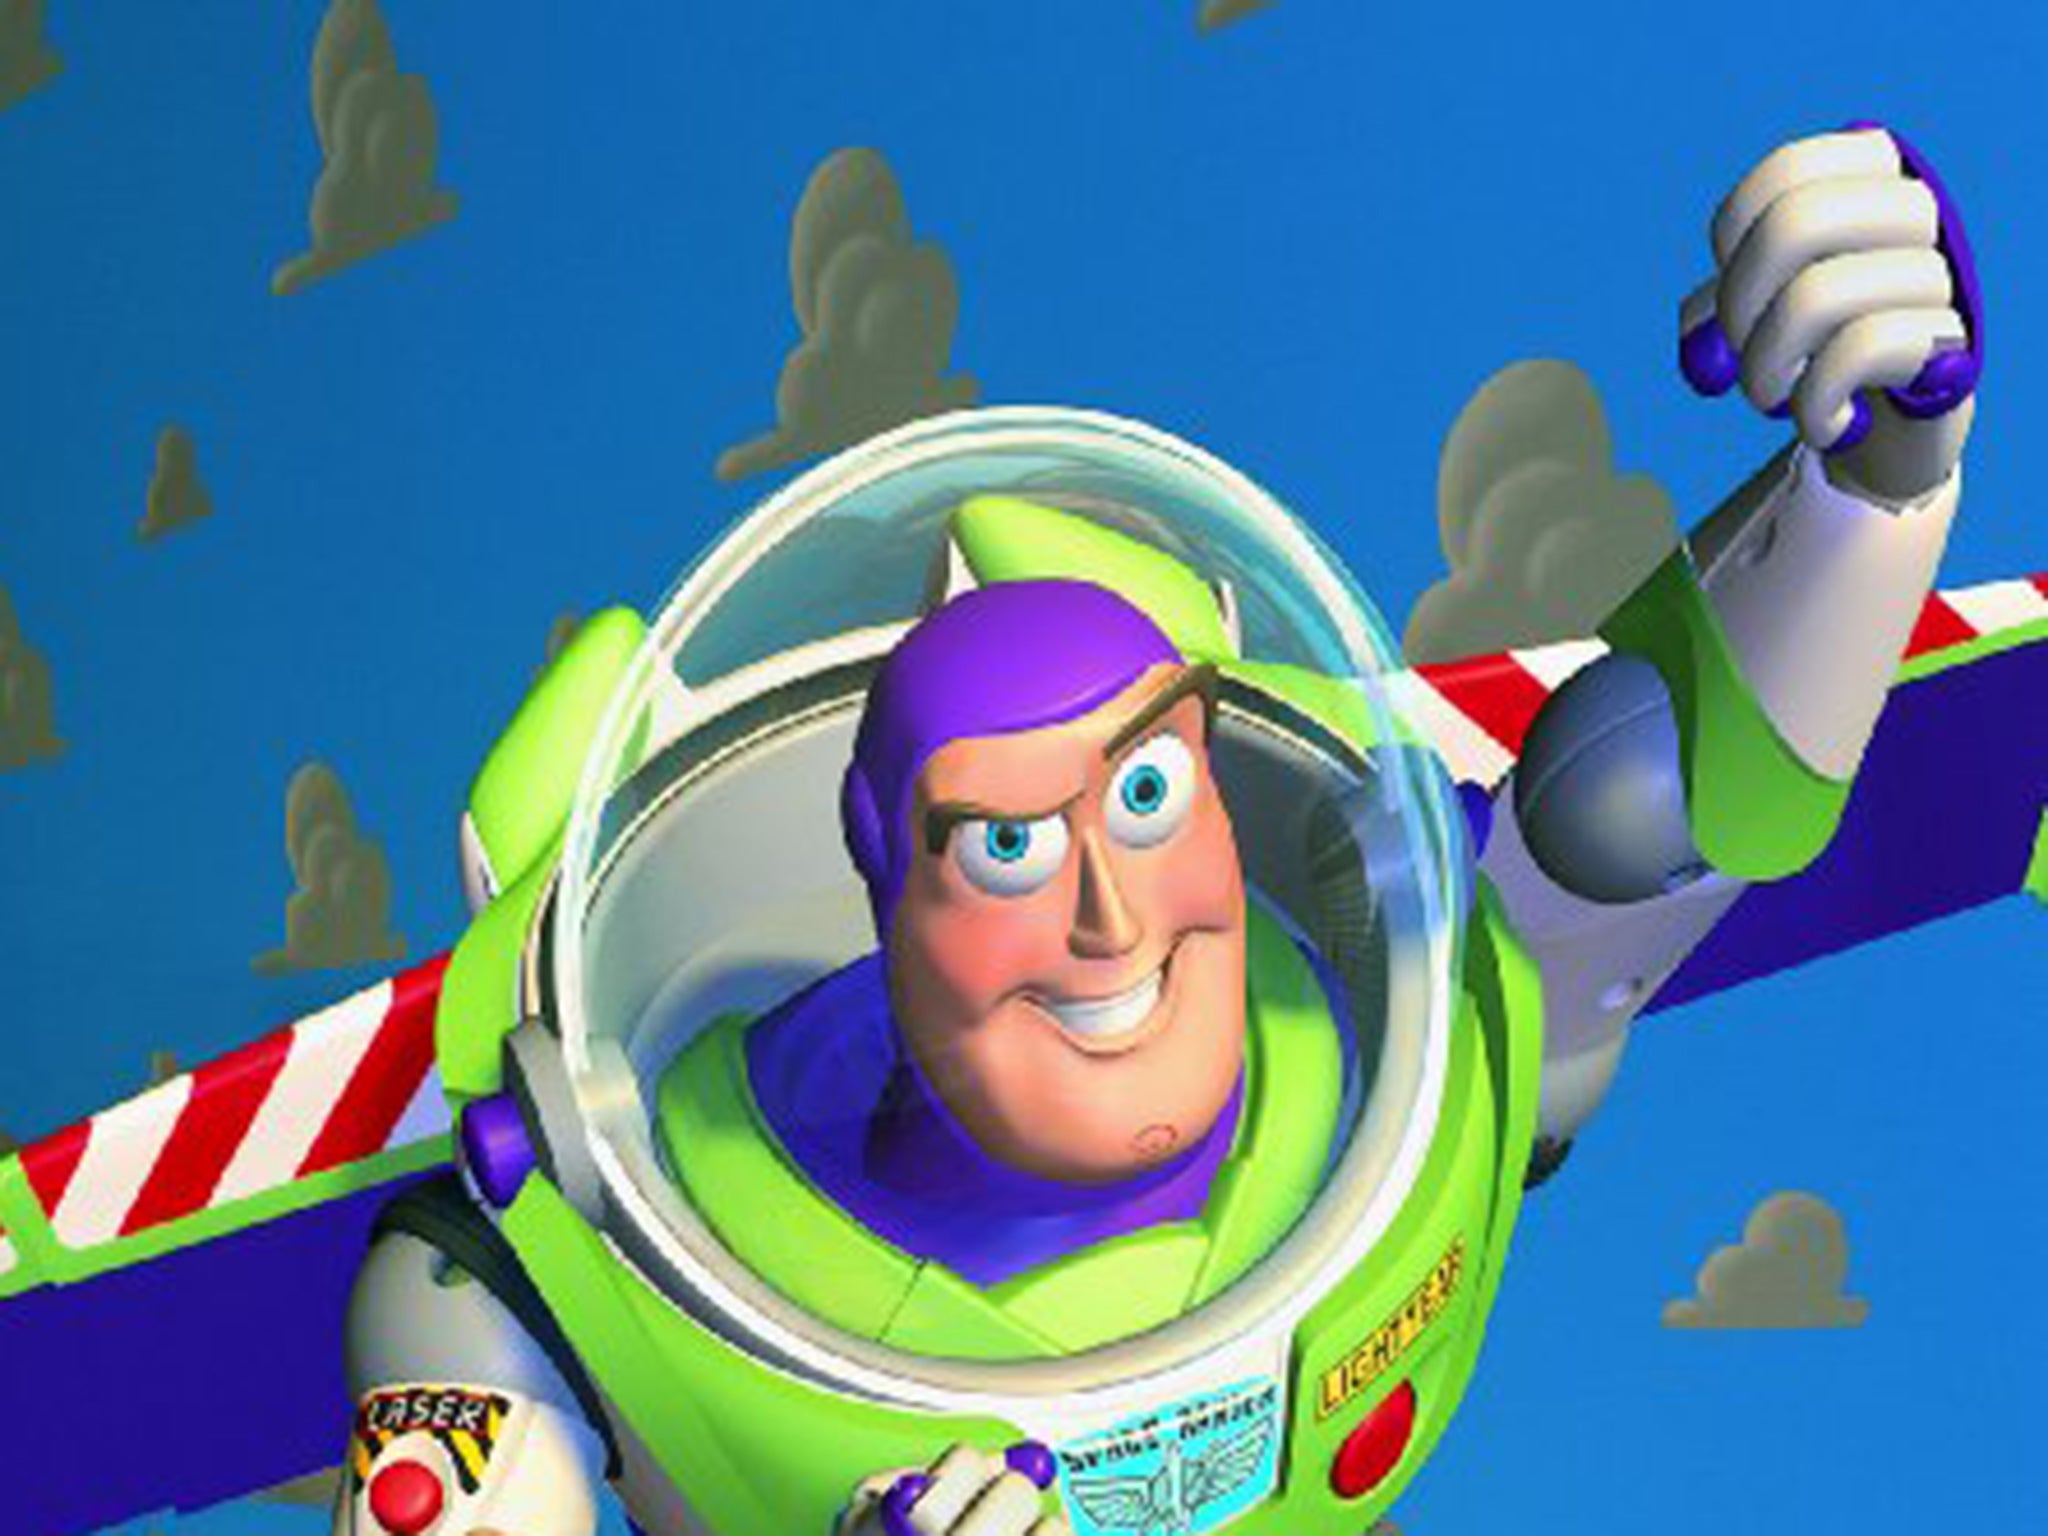 Best Film Quotes Of All Time Toy Story S To Infinity And Beyond Tops Radio Times Poll The Independent The Independent